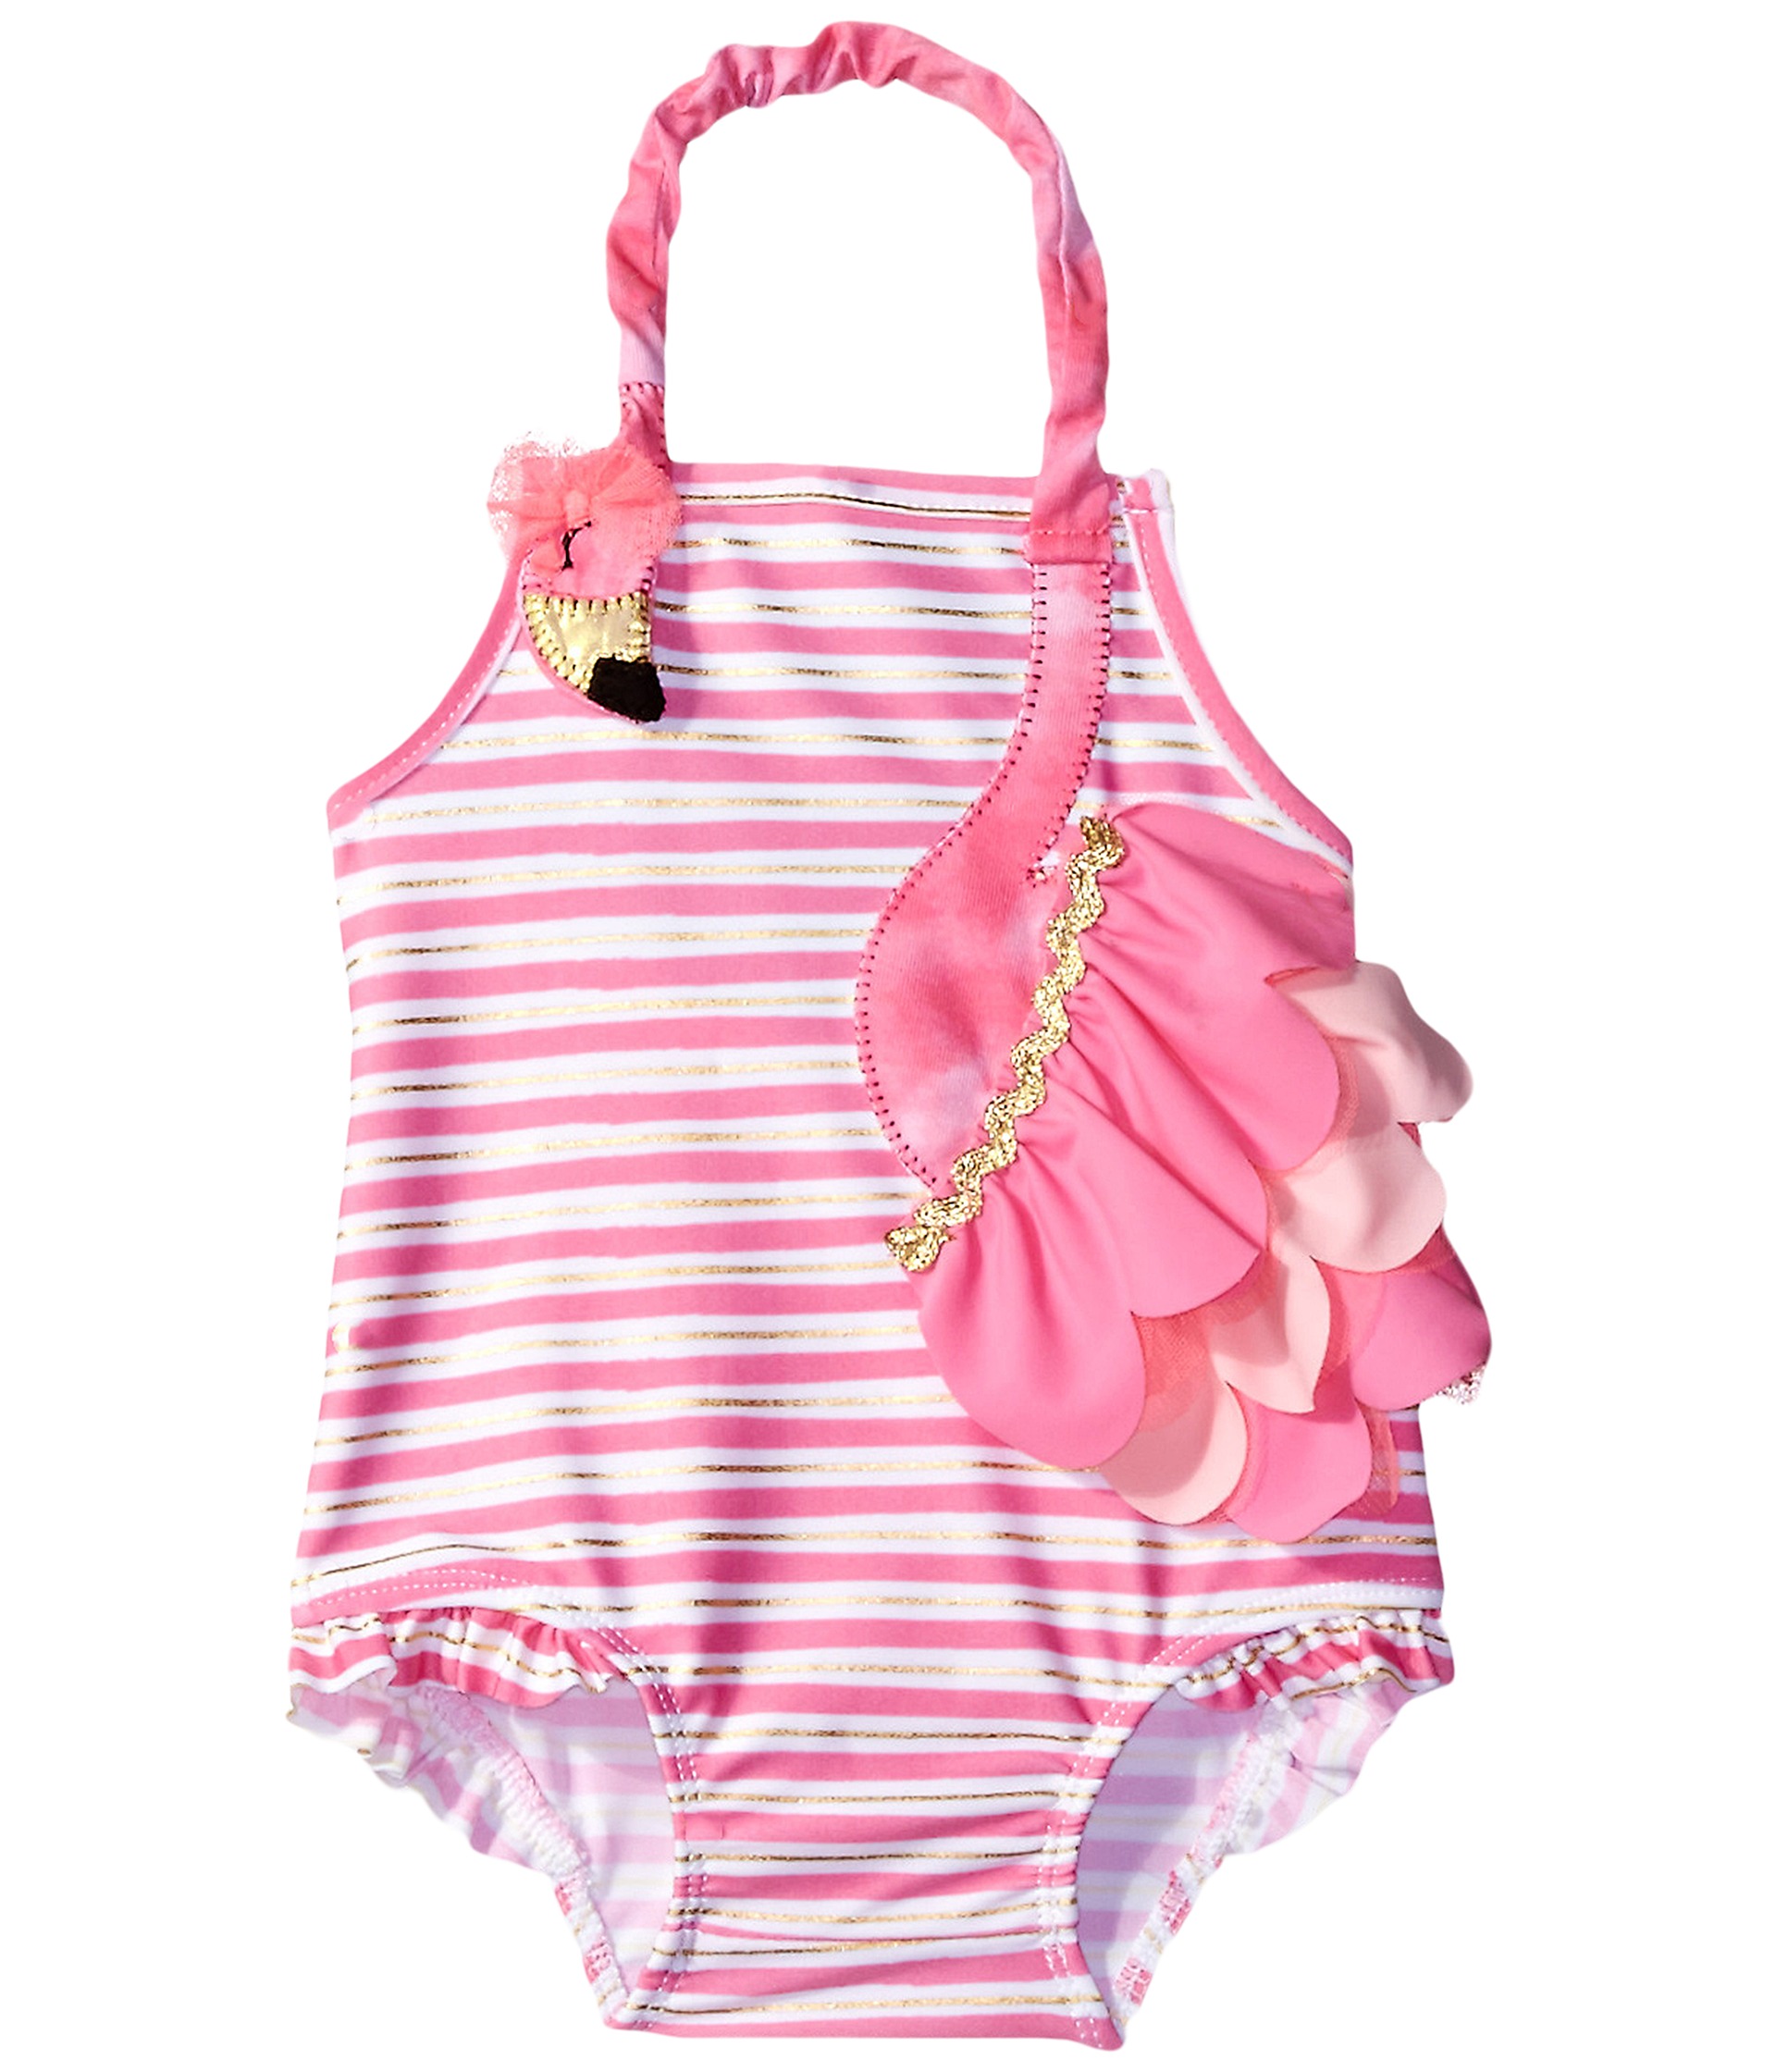 Mud Pie Flamingo Ruffle Swimsuit (Infant/Toddler) at Zappos.com